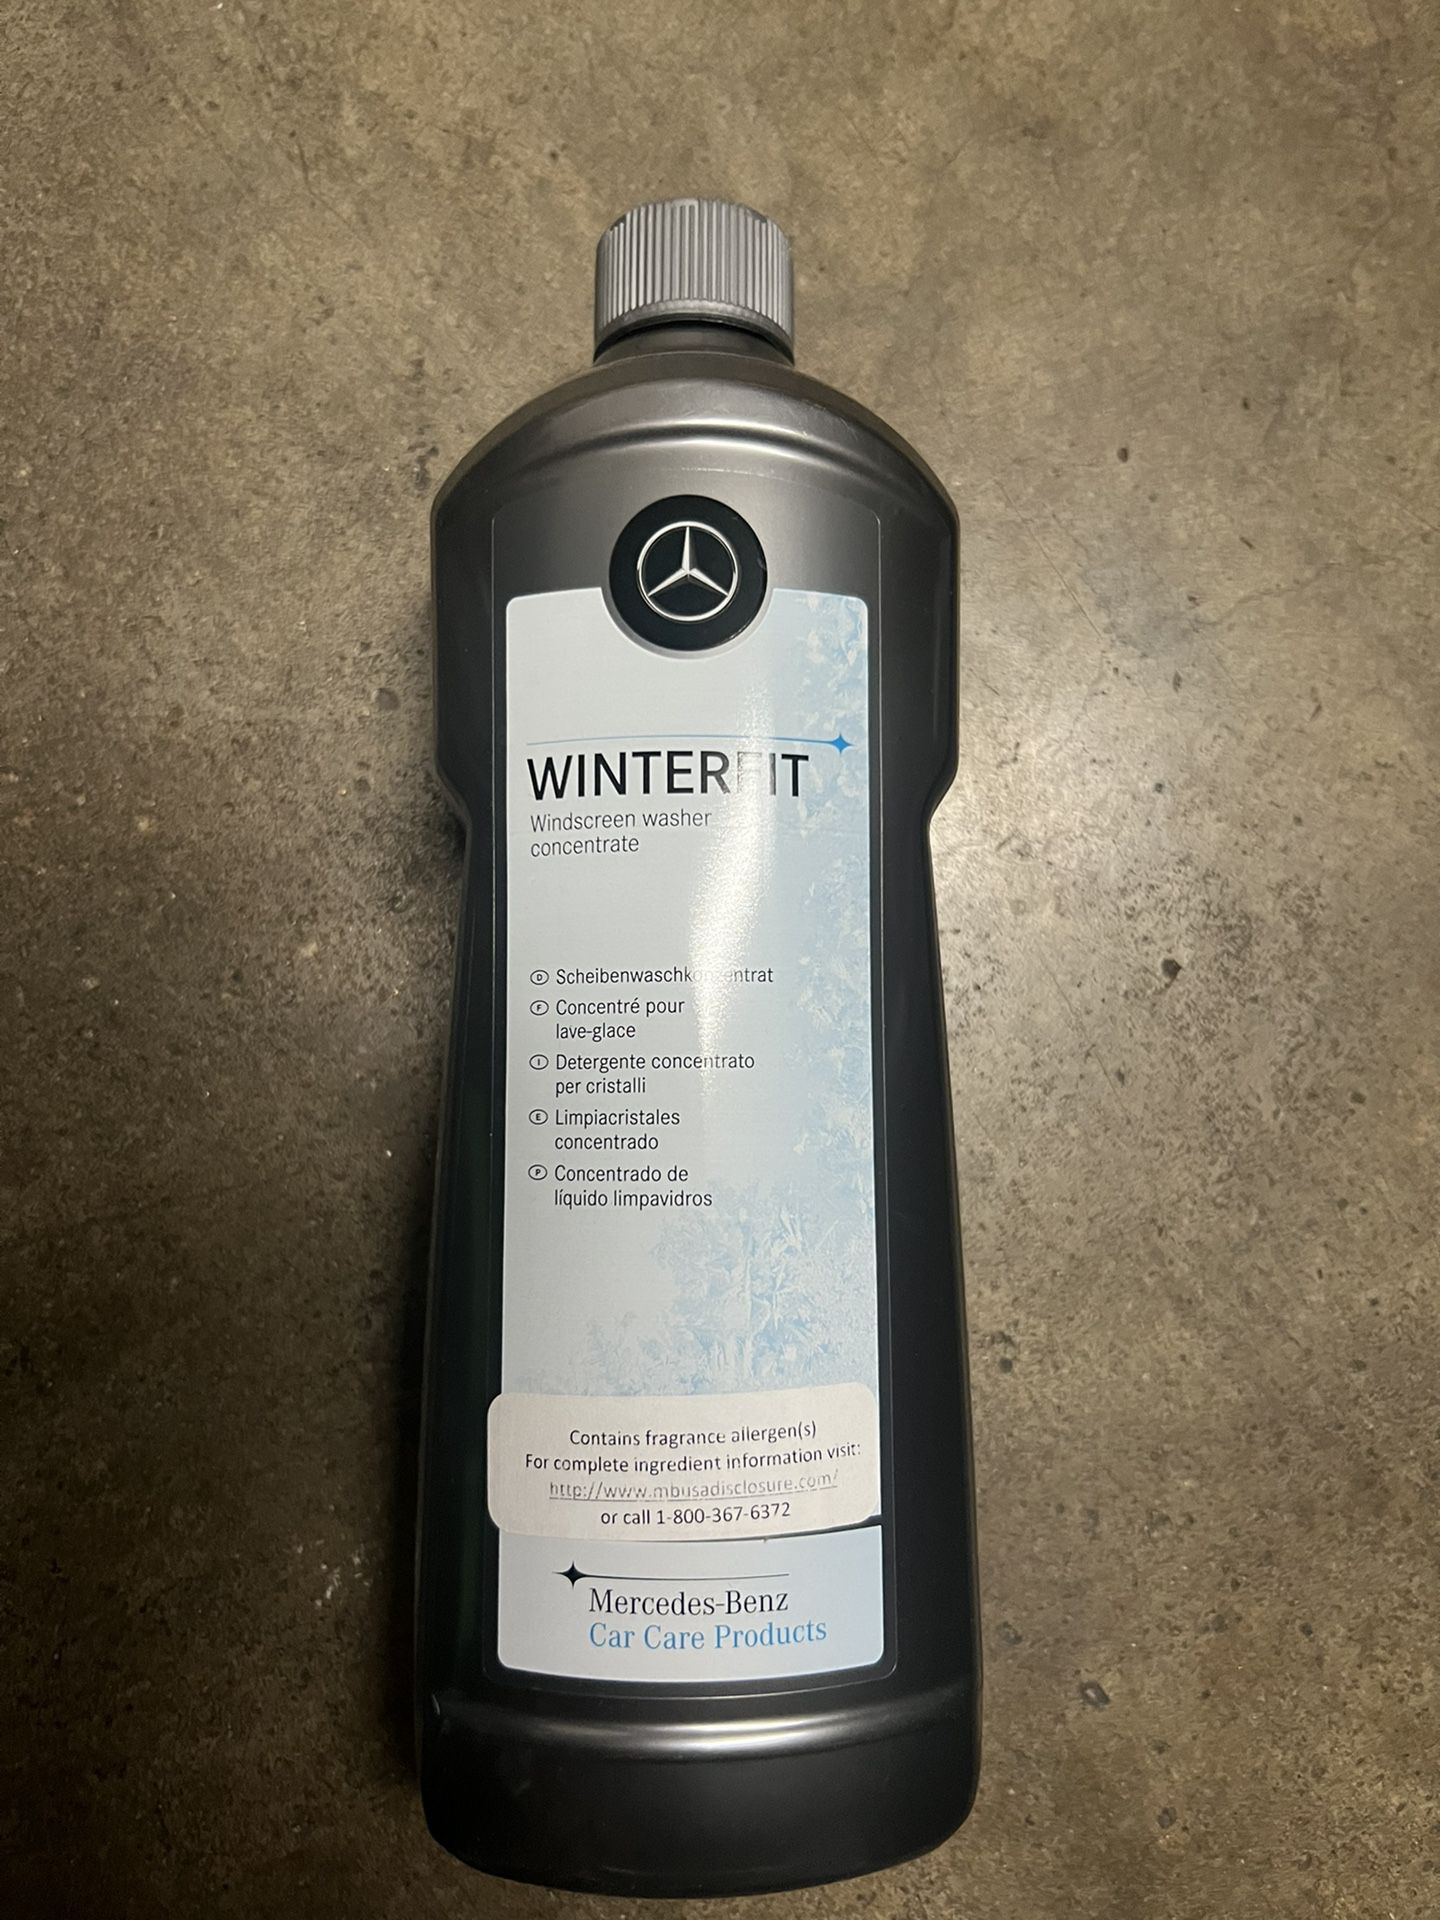 WinterFit windscreen washer concentrate